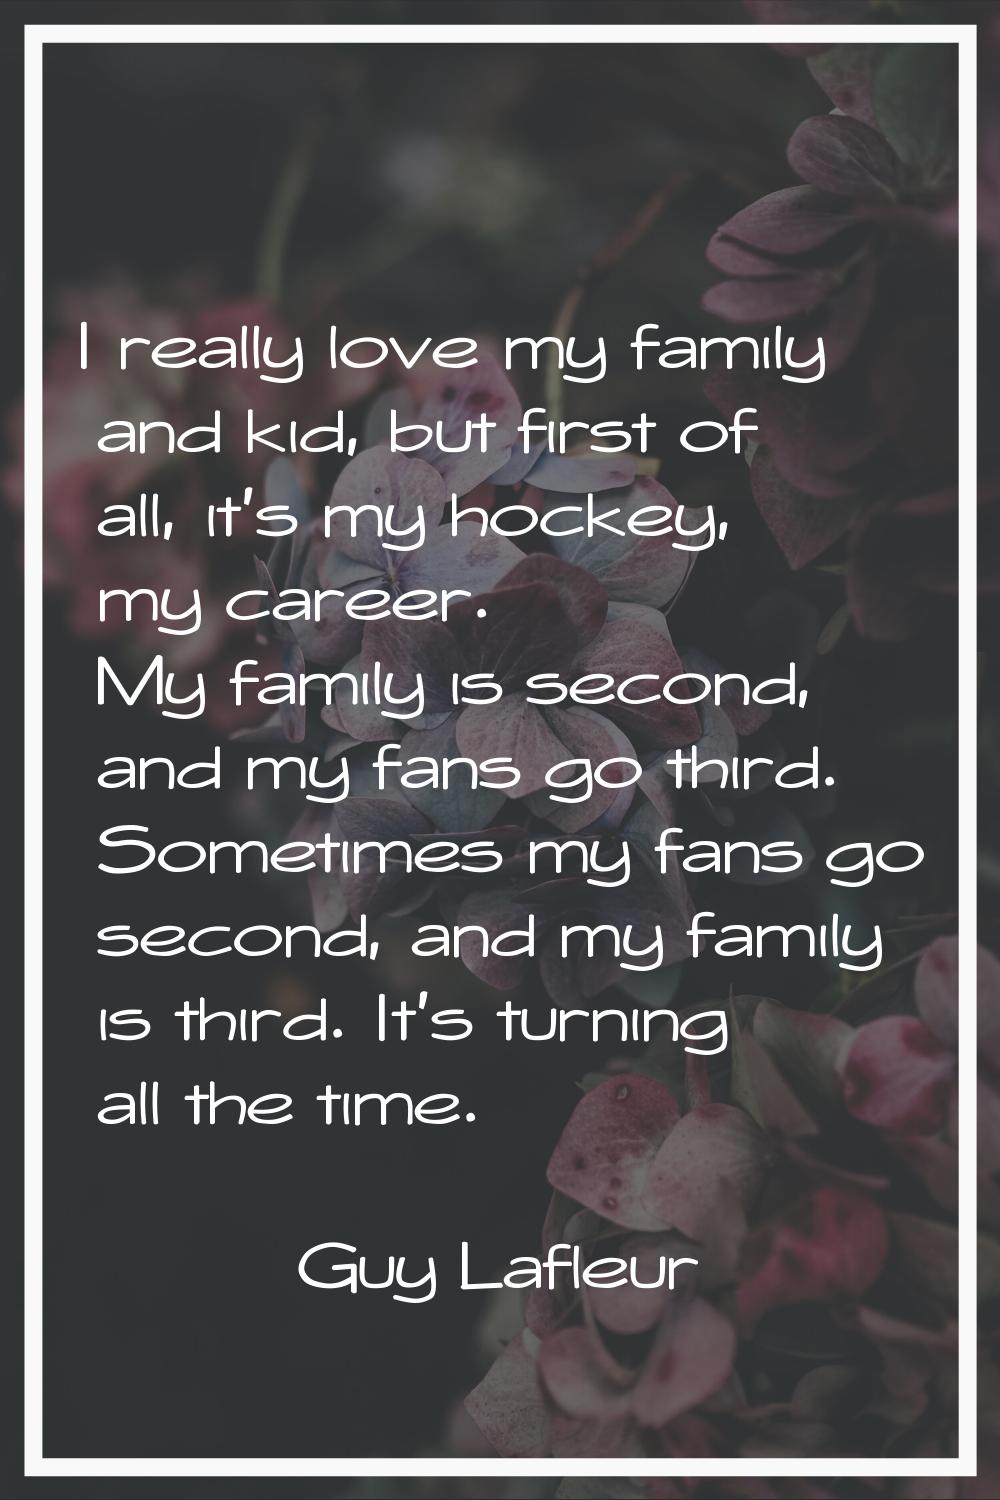 I really love my family and kid, but first of all, it's my hockey, my career. My family is second, 